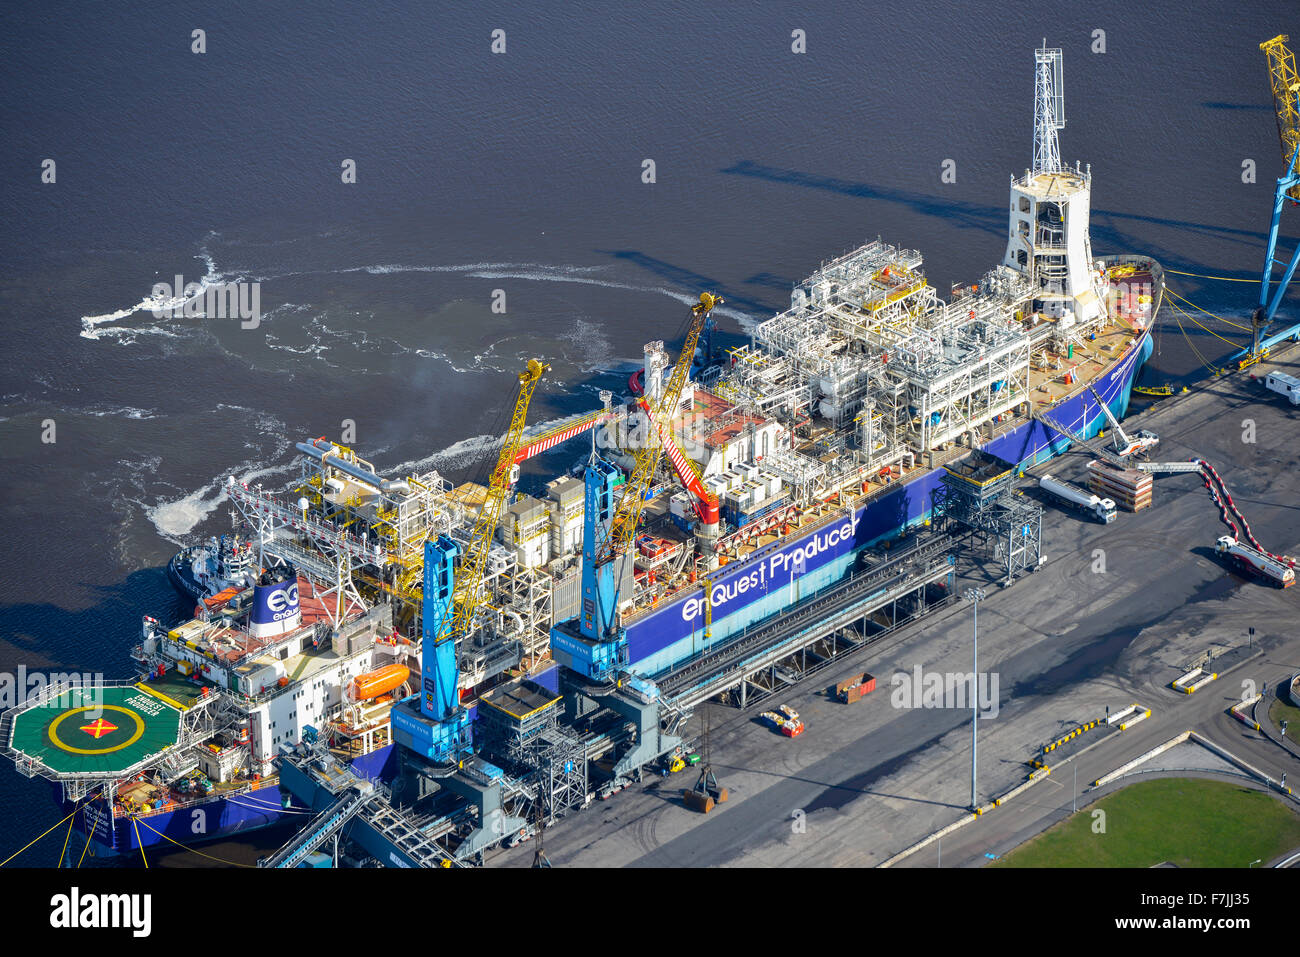 An aerial view of the Enquest Producer, Oil and Gas vessel Stock Photo